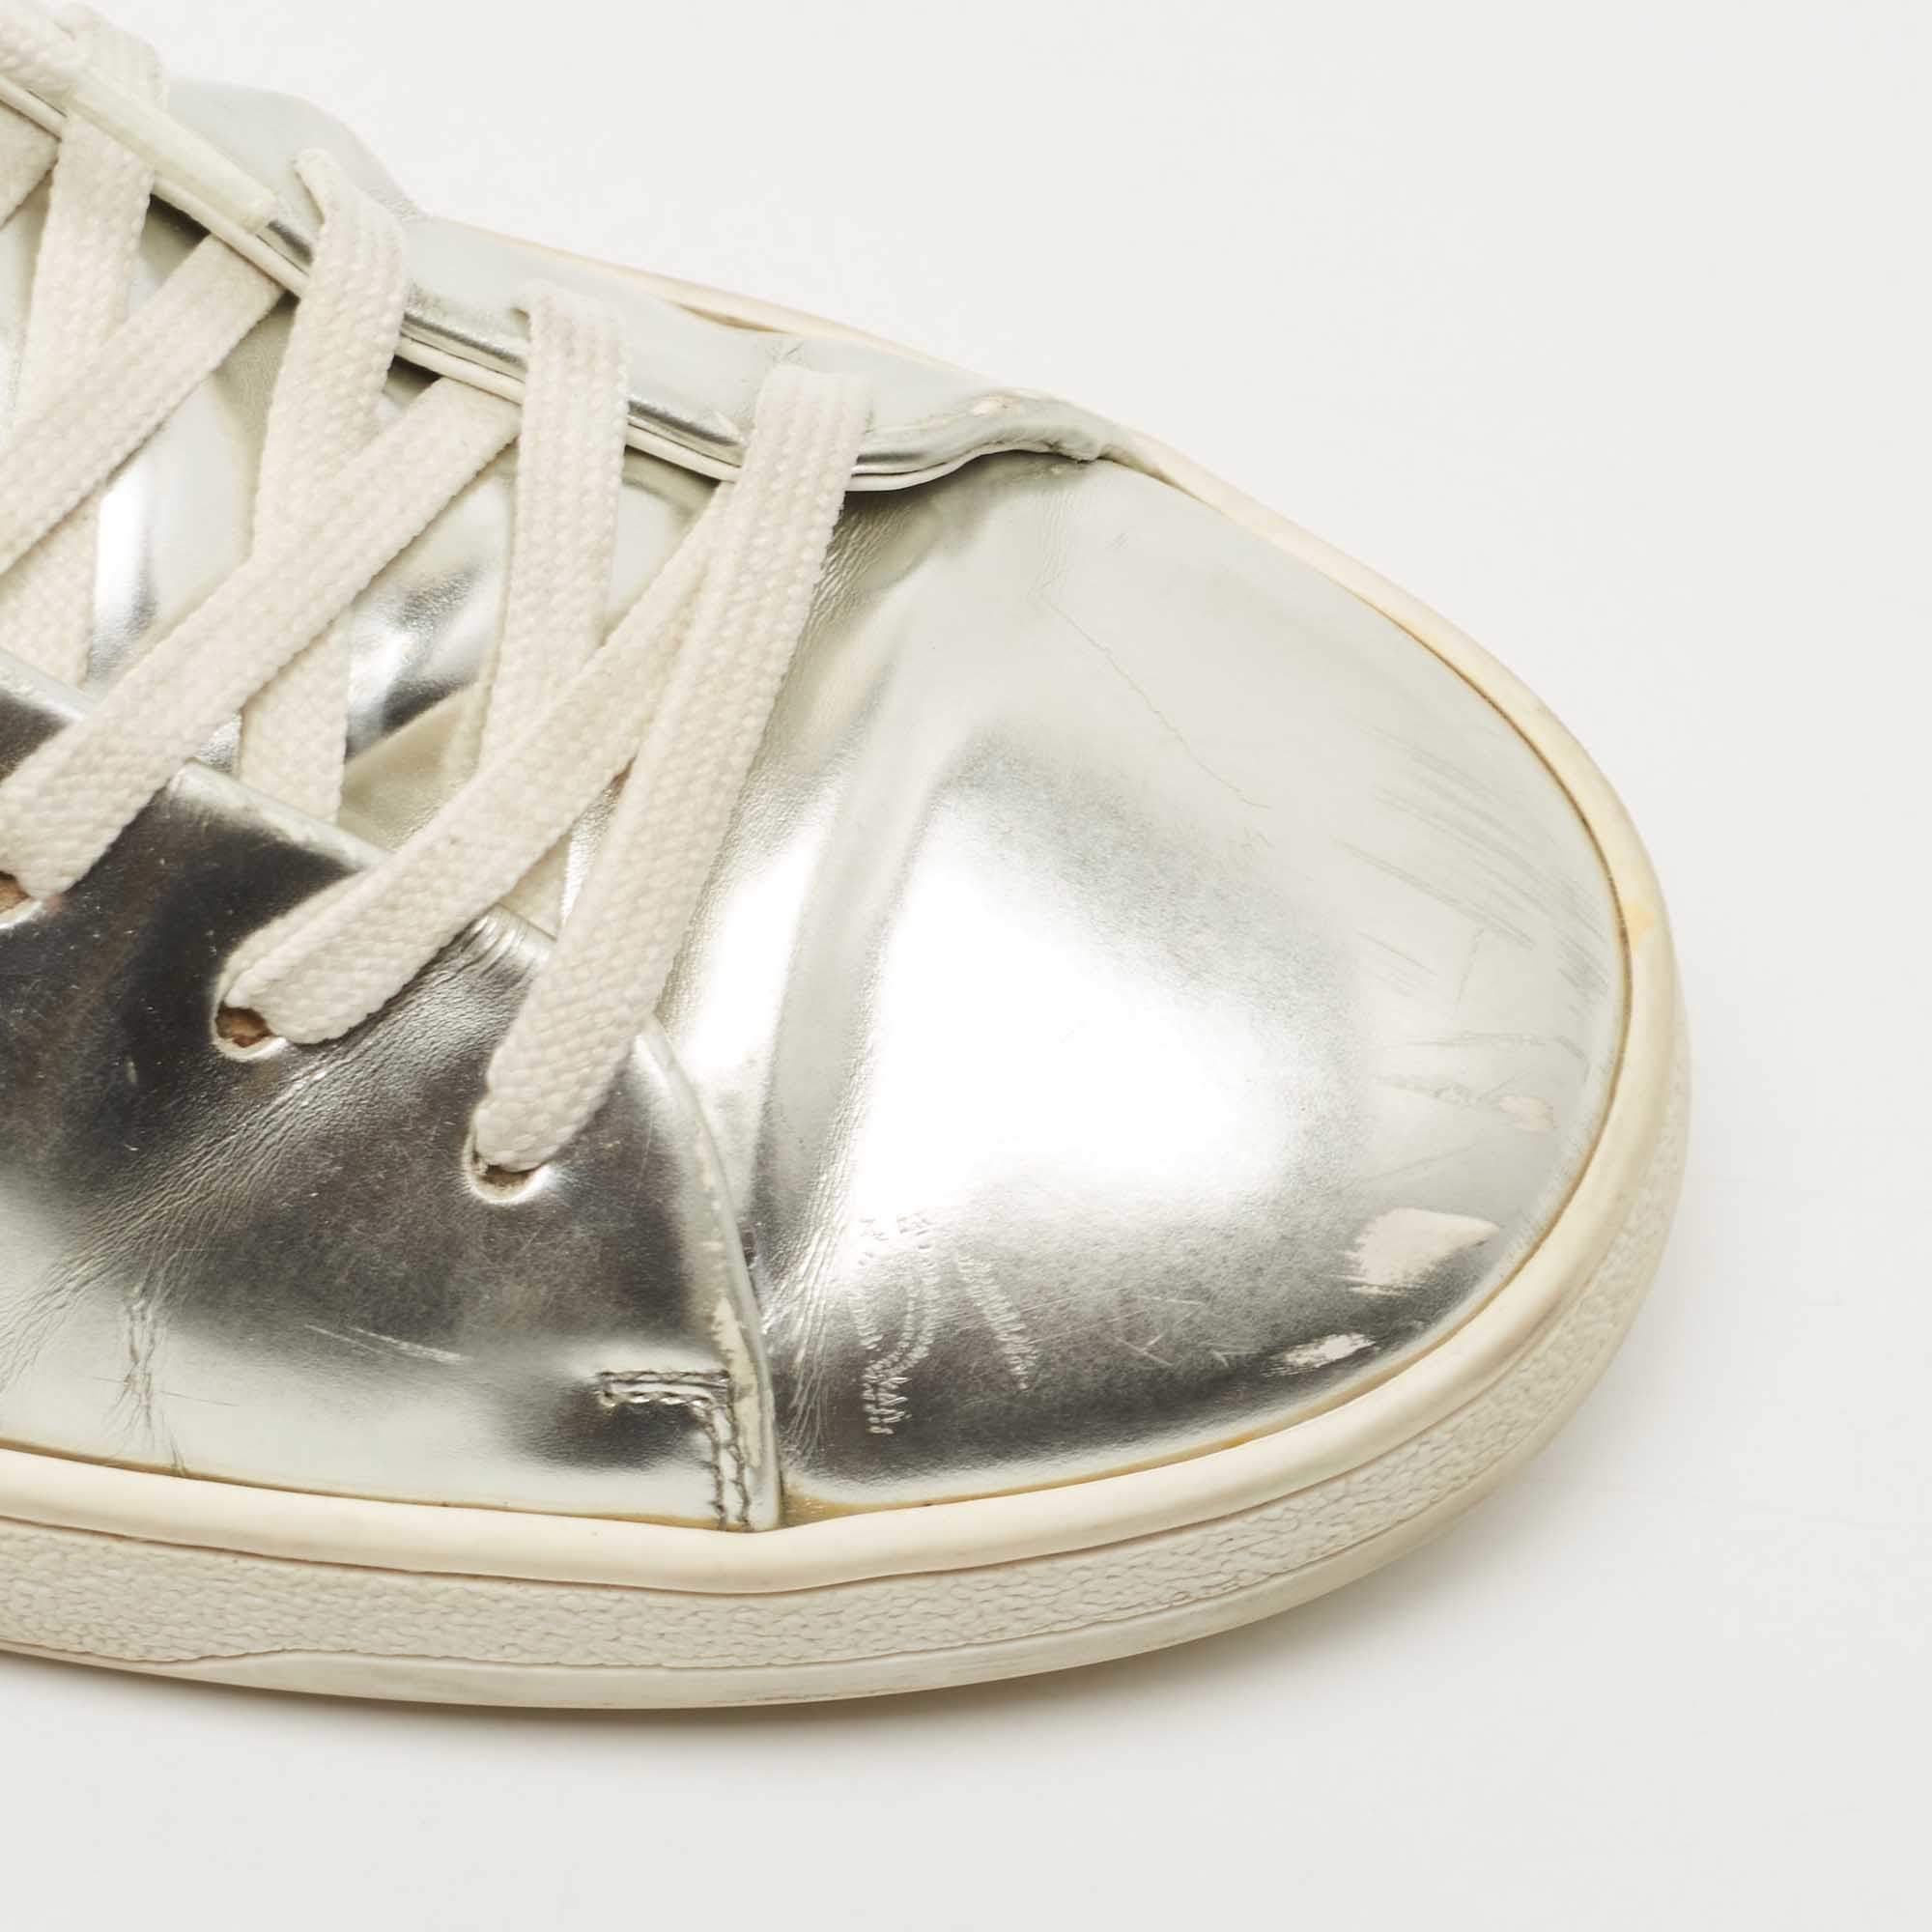 Louis Vuitton Silver Foil Leather Frontrow Low Top Sneakers Size